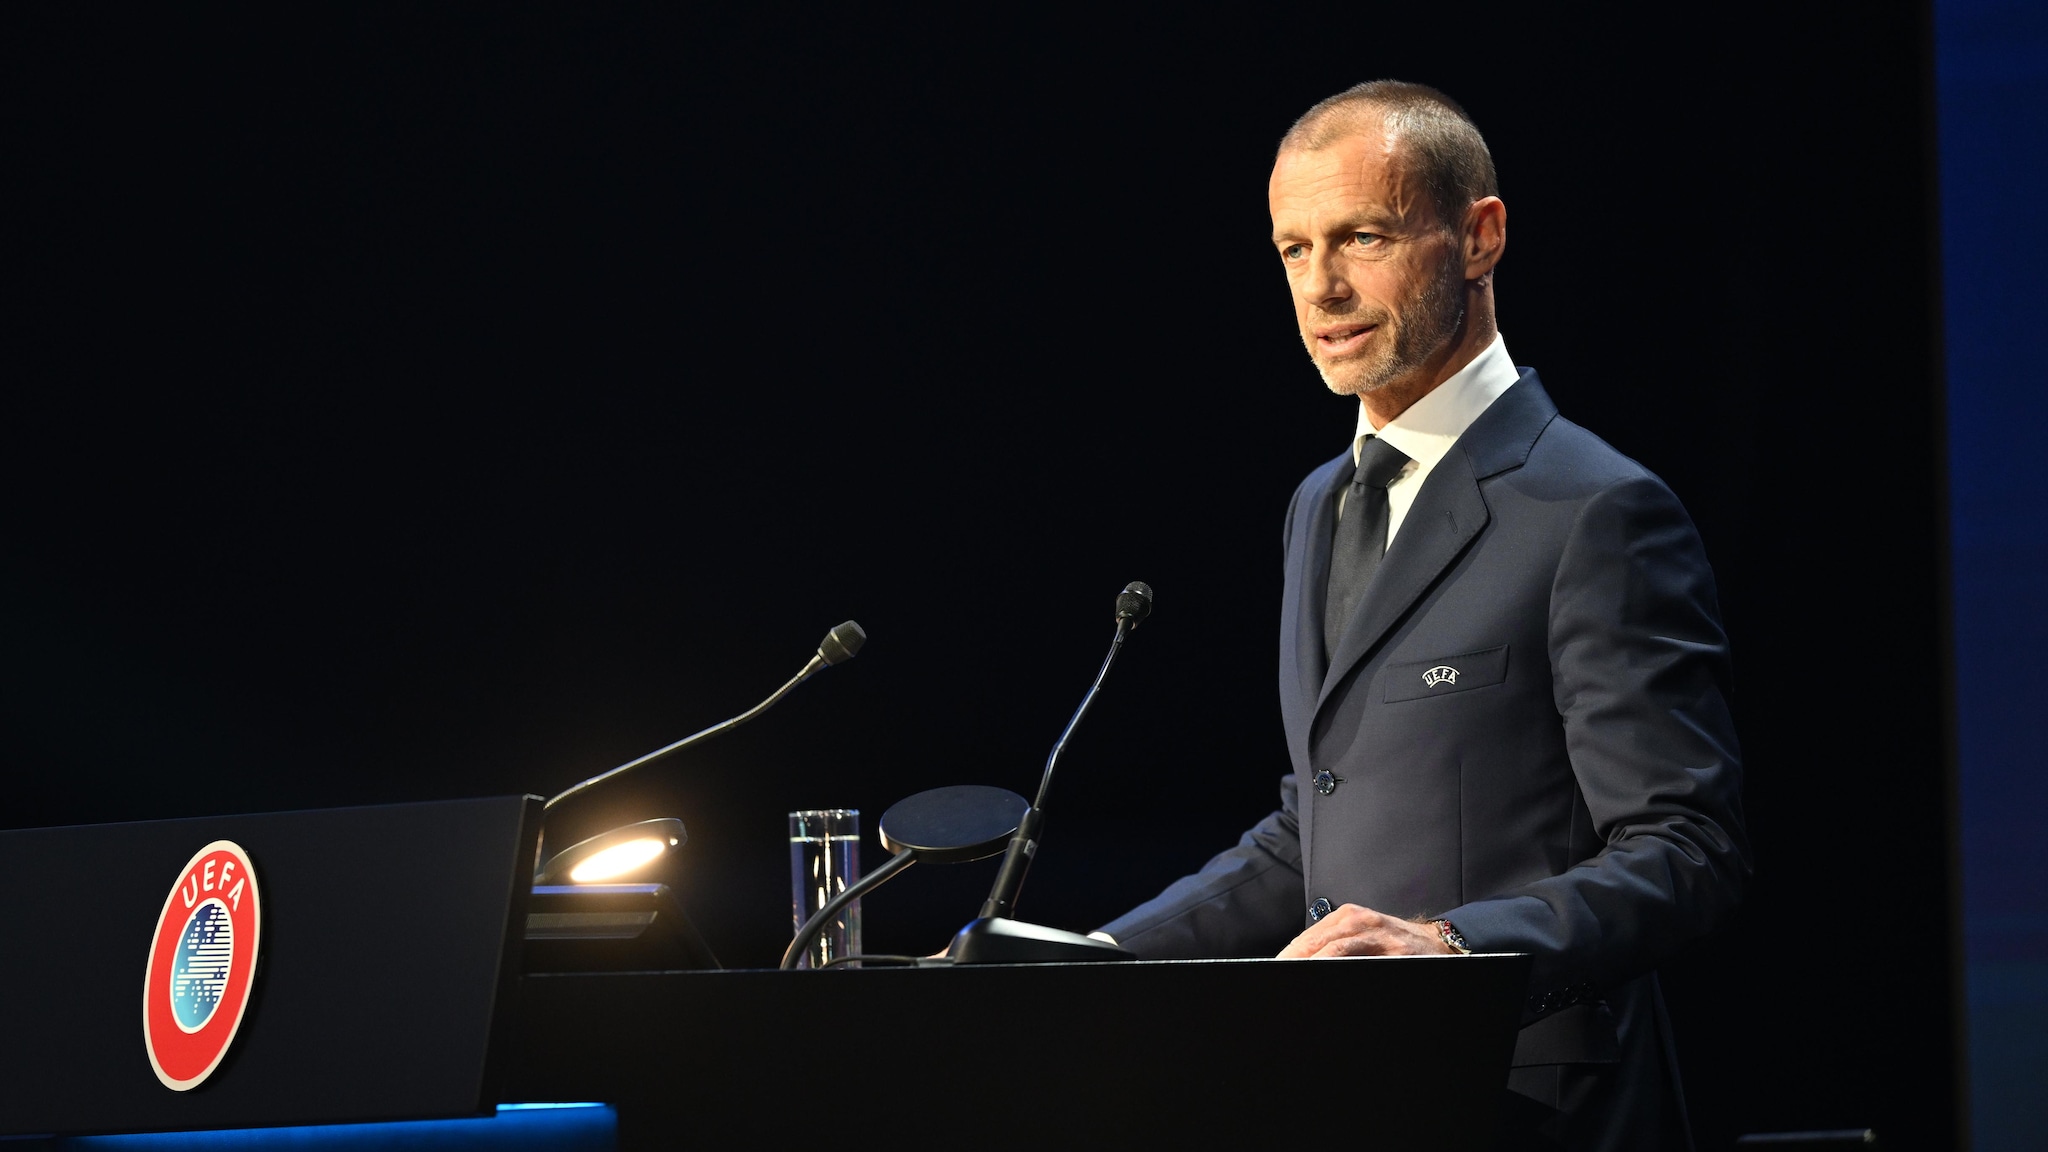 UEFA President: “Football is united to win all challenges” |  UEFA